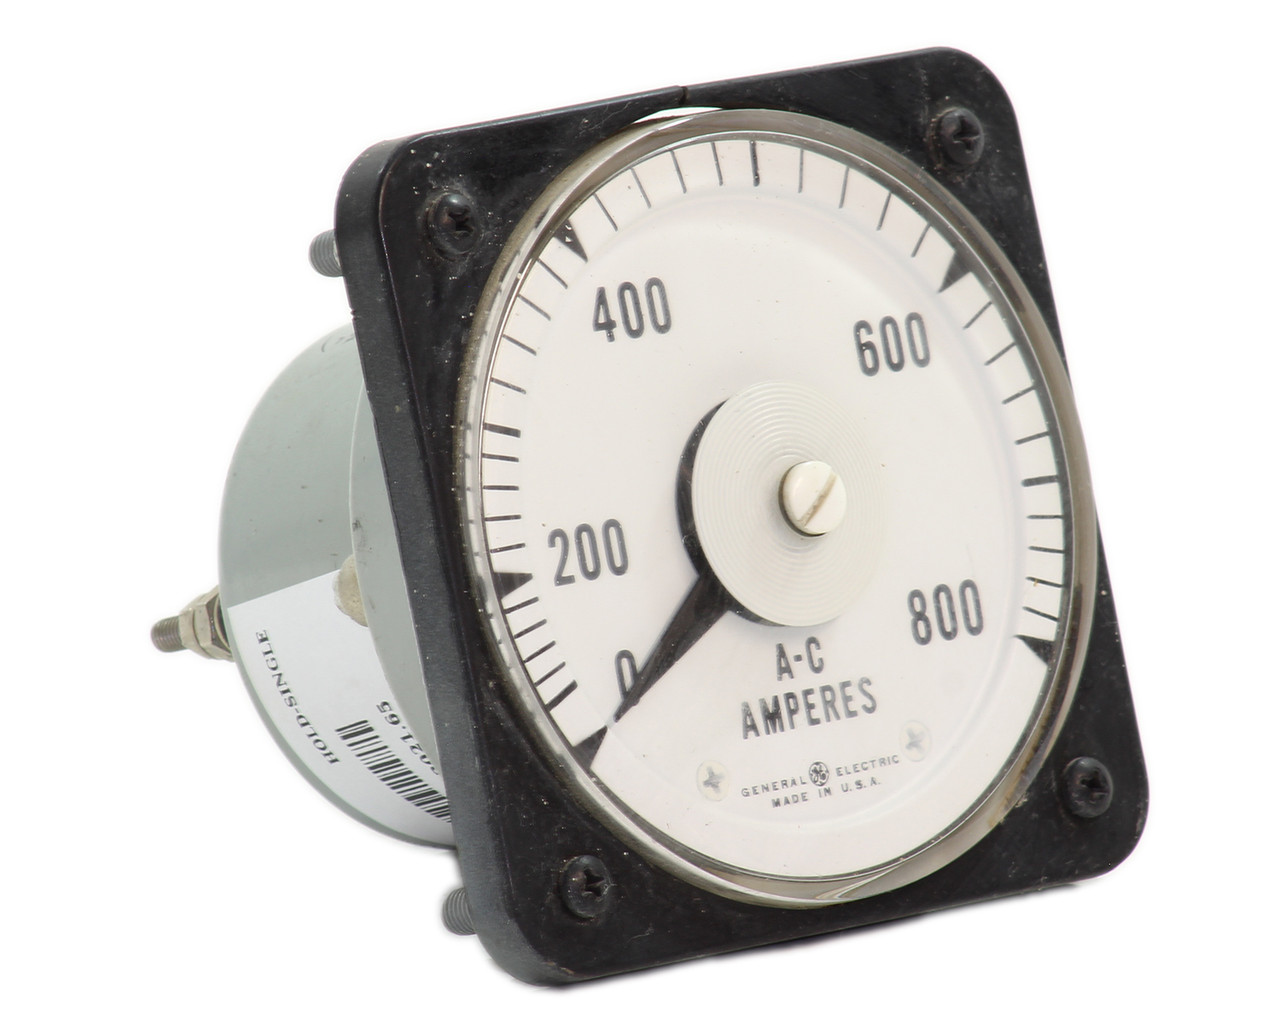 General Electric 50-103131-LSSNZ A-C Ammeter Type AB-40, Full Scale 5A, CT Ratio 160:1, Cycles 40-70, Code 124